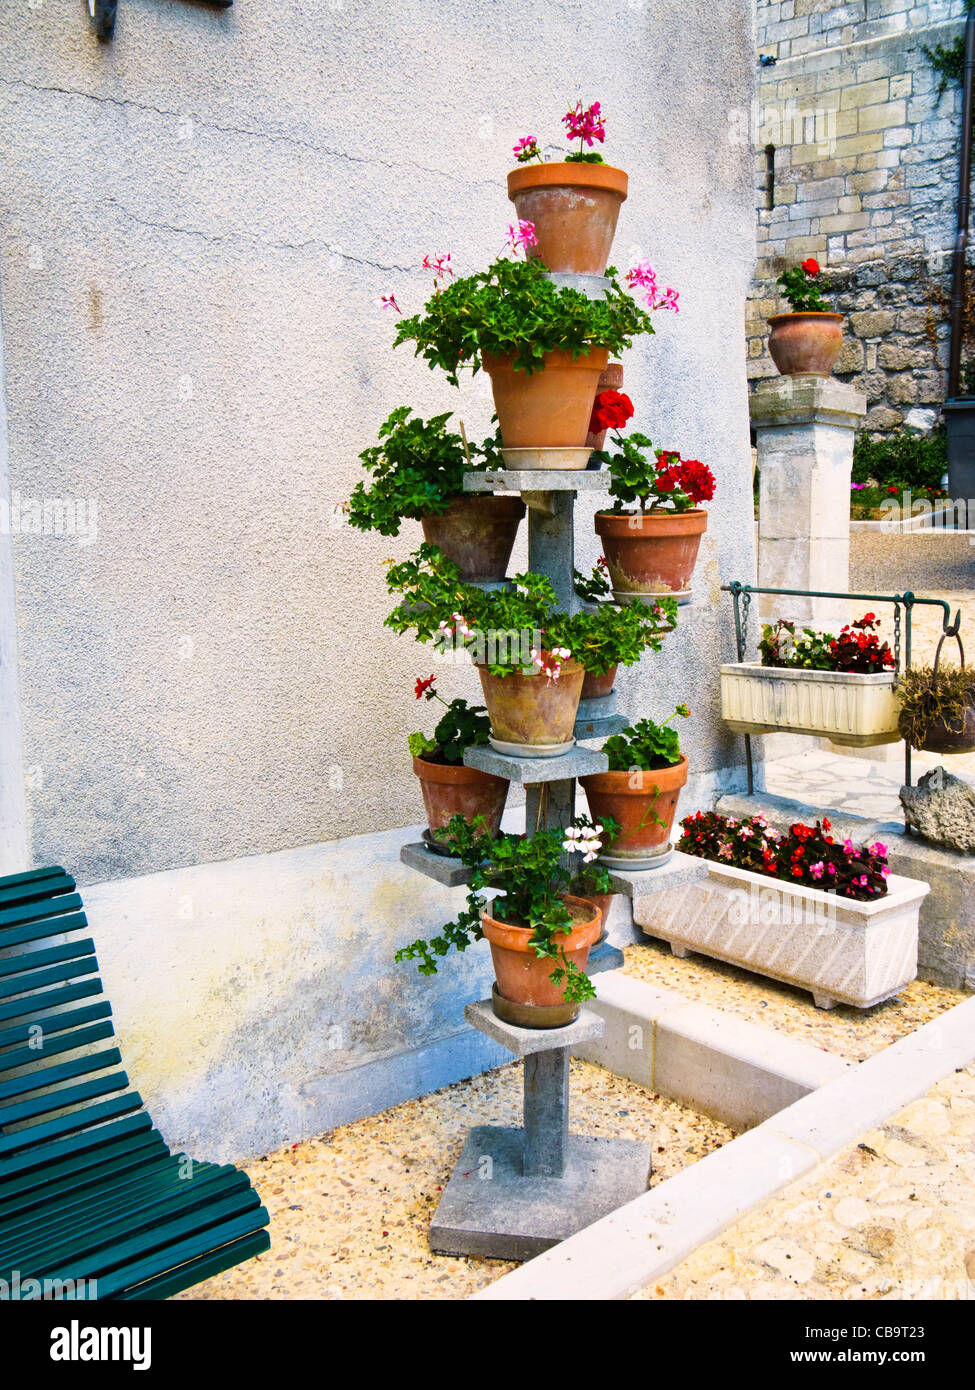 Flower pots on a decoration display stand Stock Photo